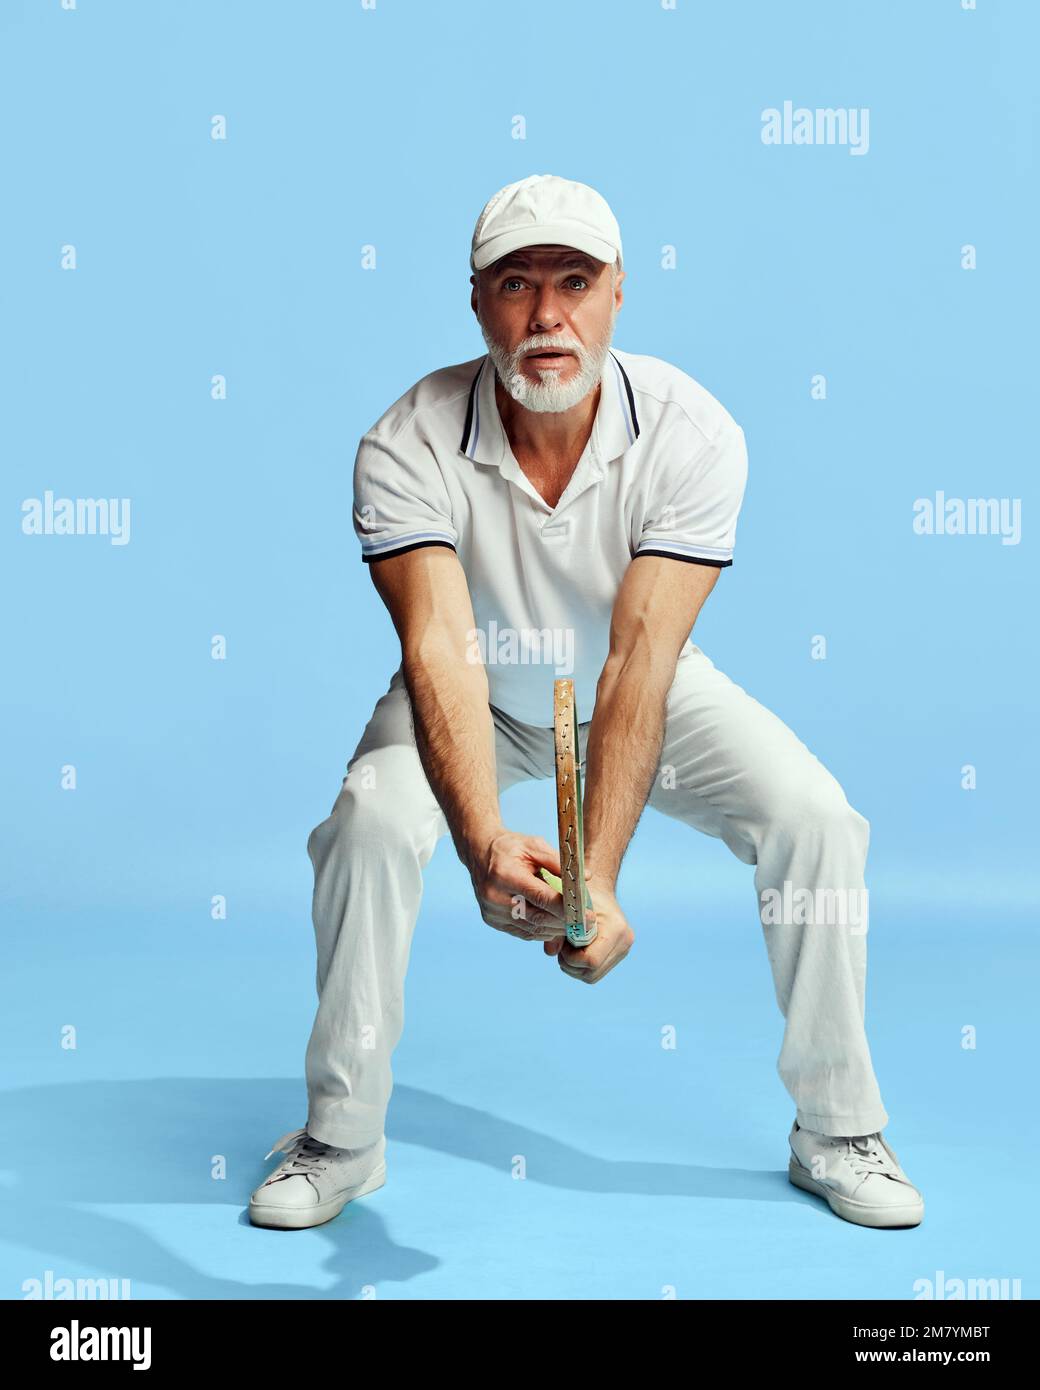 Concentration. Portrait of handsome senior man in stylish white outfit holding tennis racket over blue background. Concept of leisure activity, hobby Stock Photo